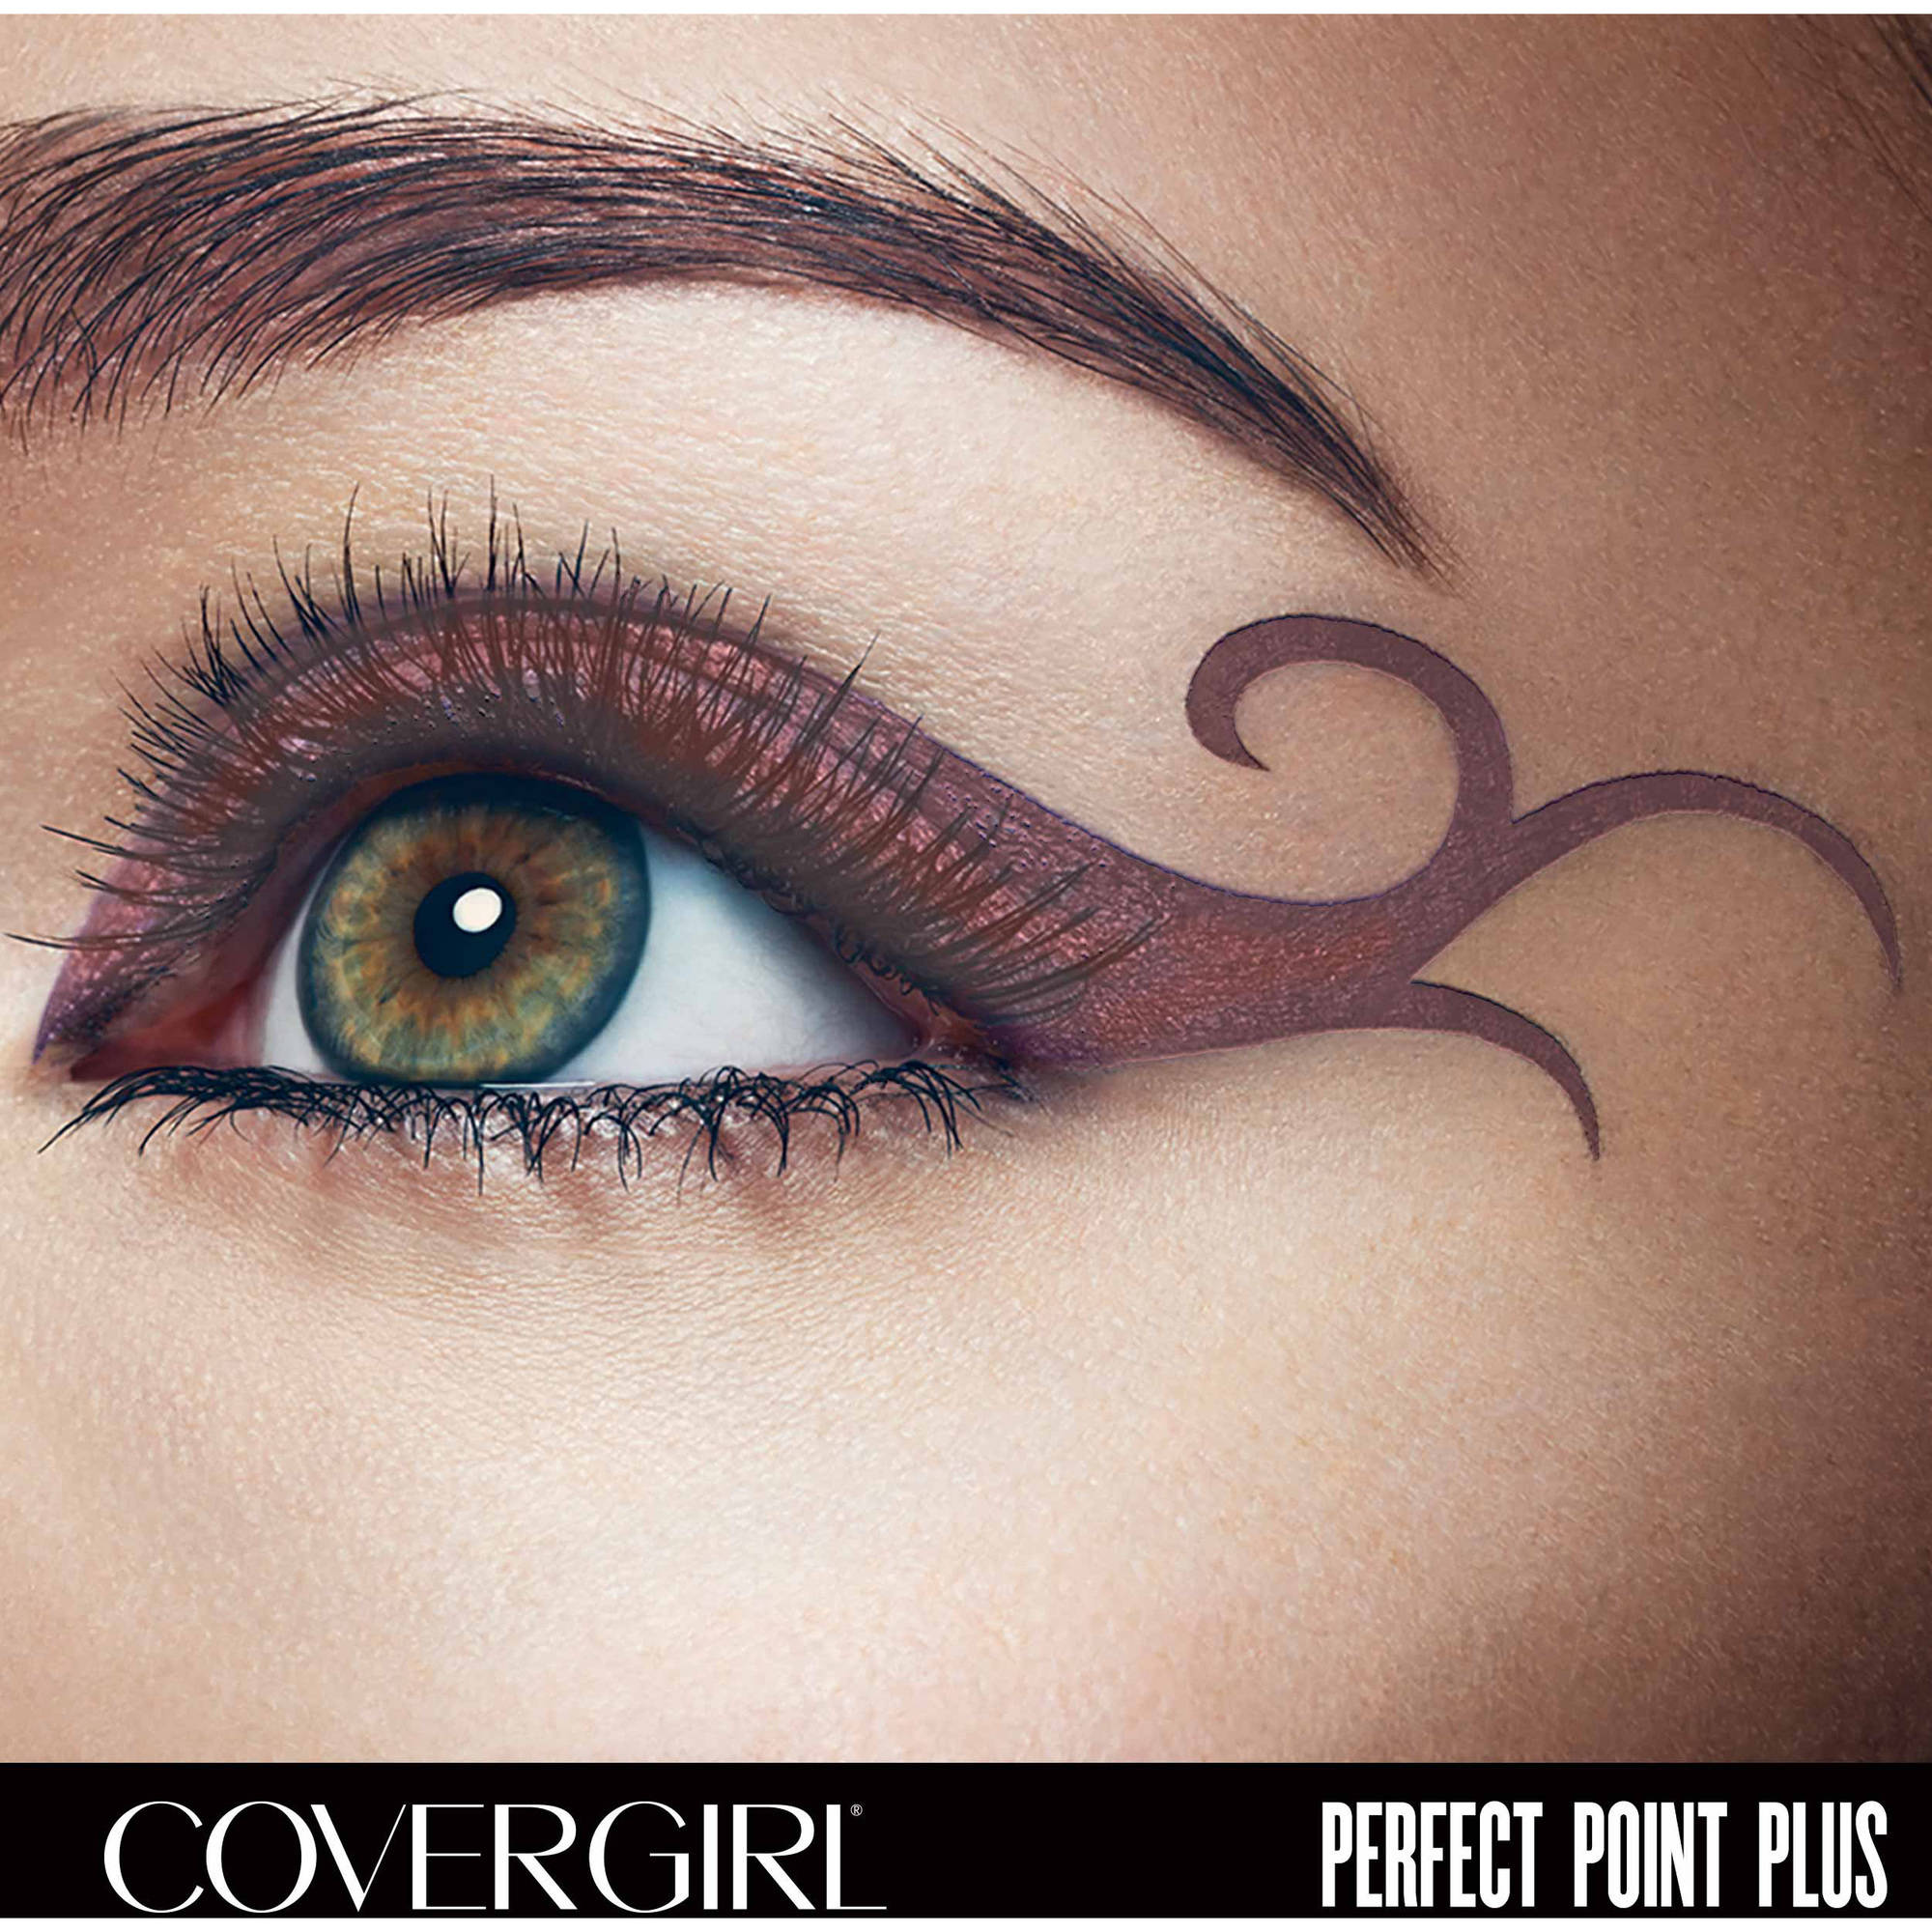 COVERGIRL Ink It! by Perfect Point Plus Gel Eyeliner, 270 Copper Ink - image 5 of 5